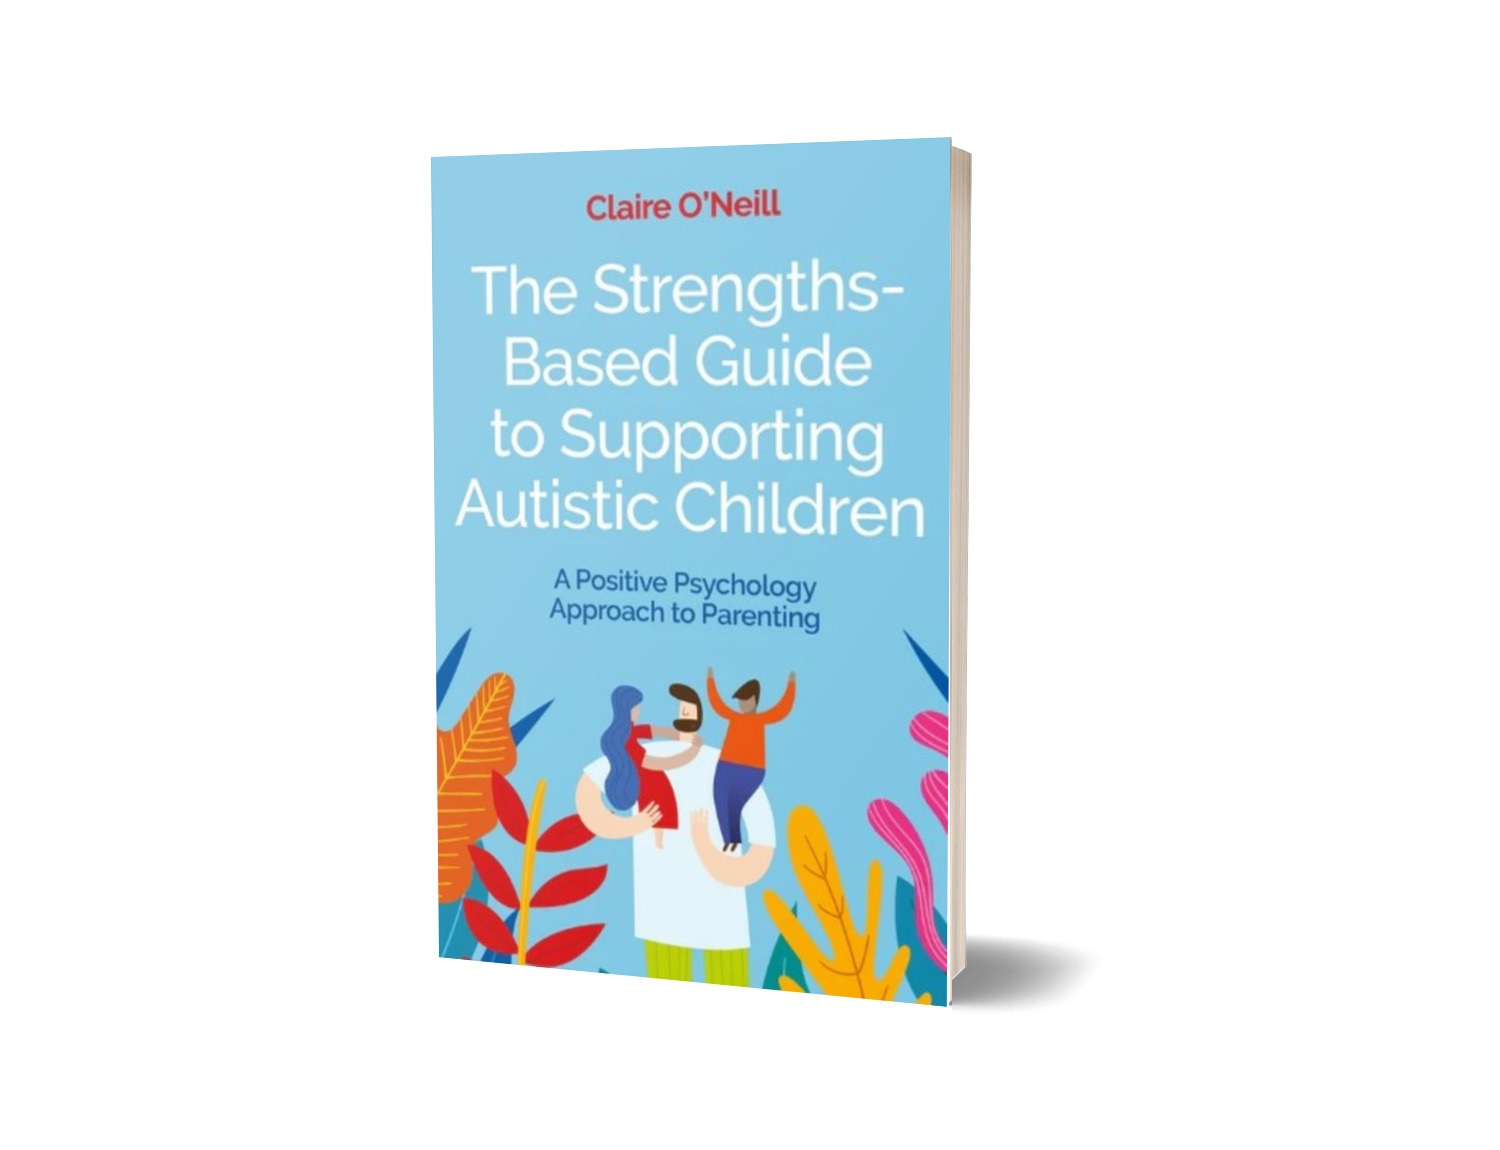 Autistic　Resources　Box　Guide　The　the　Outside　Children,　Strengths-Based　Supporting　to　Learning